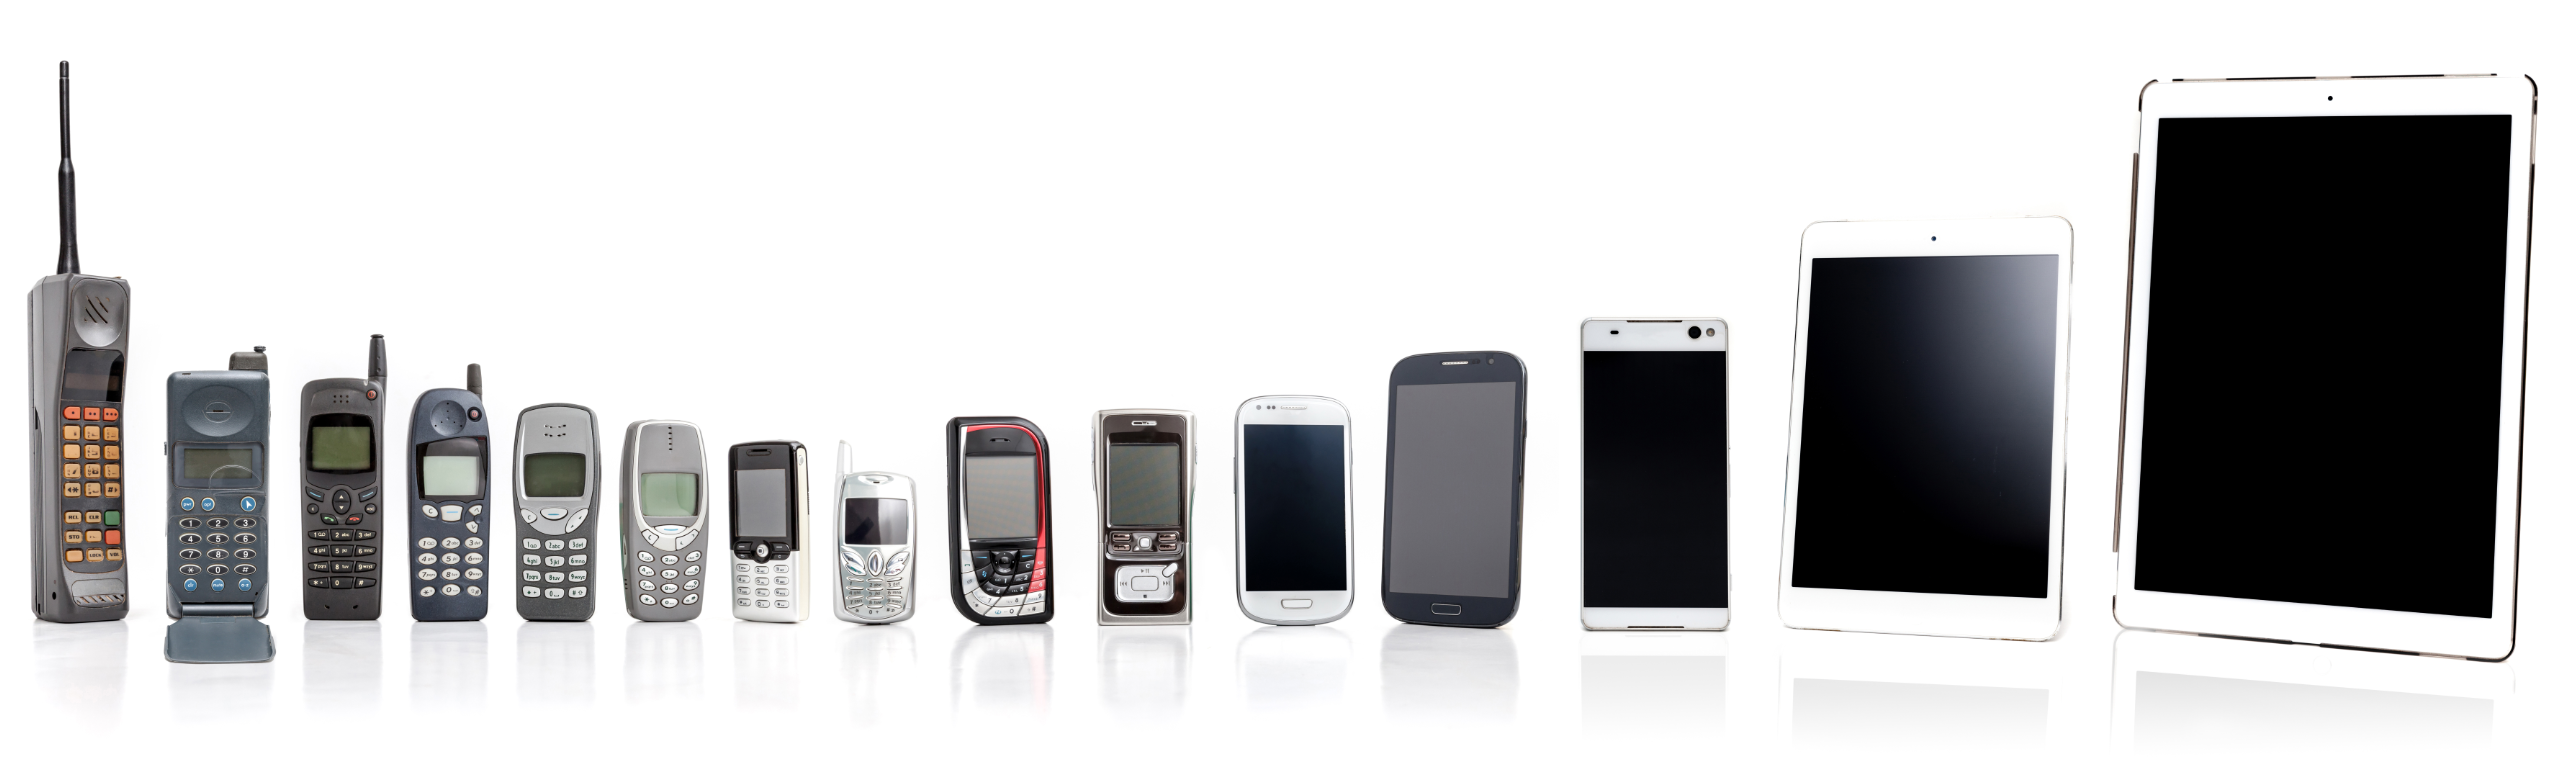 various mobile phone from early models to current ones